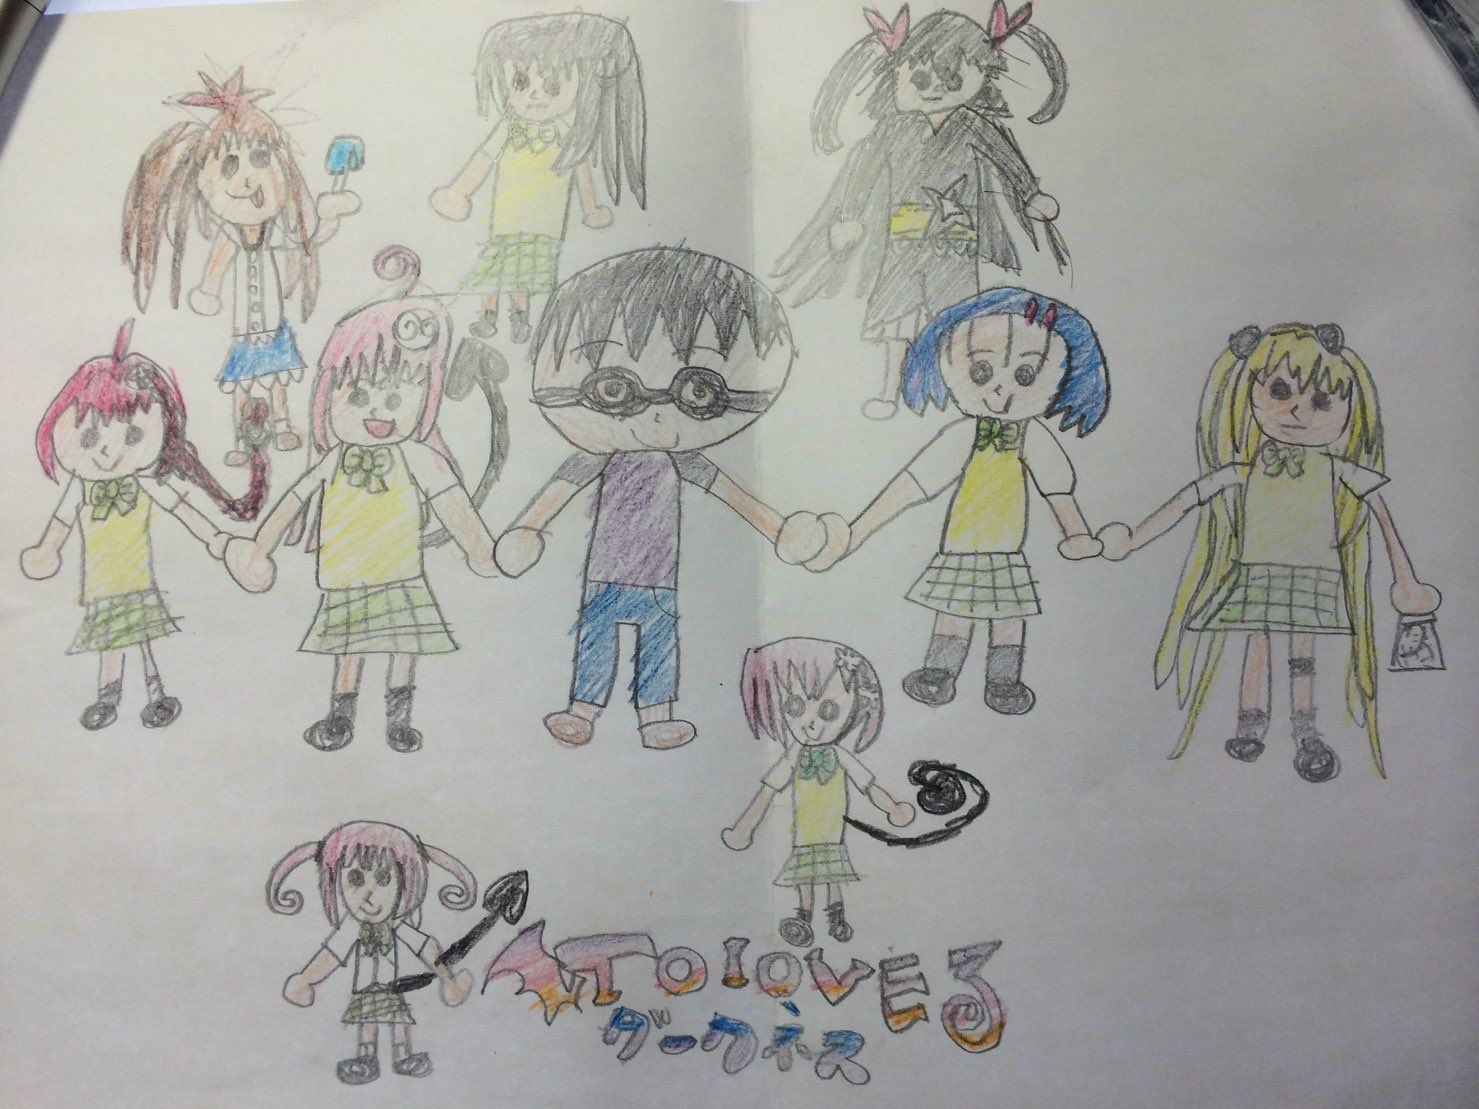 [Image] A picture drawn by the daughter of the author who is ToLOVE, too good wwwwwwwwww 2